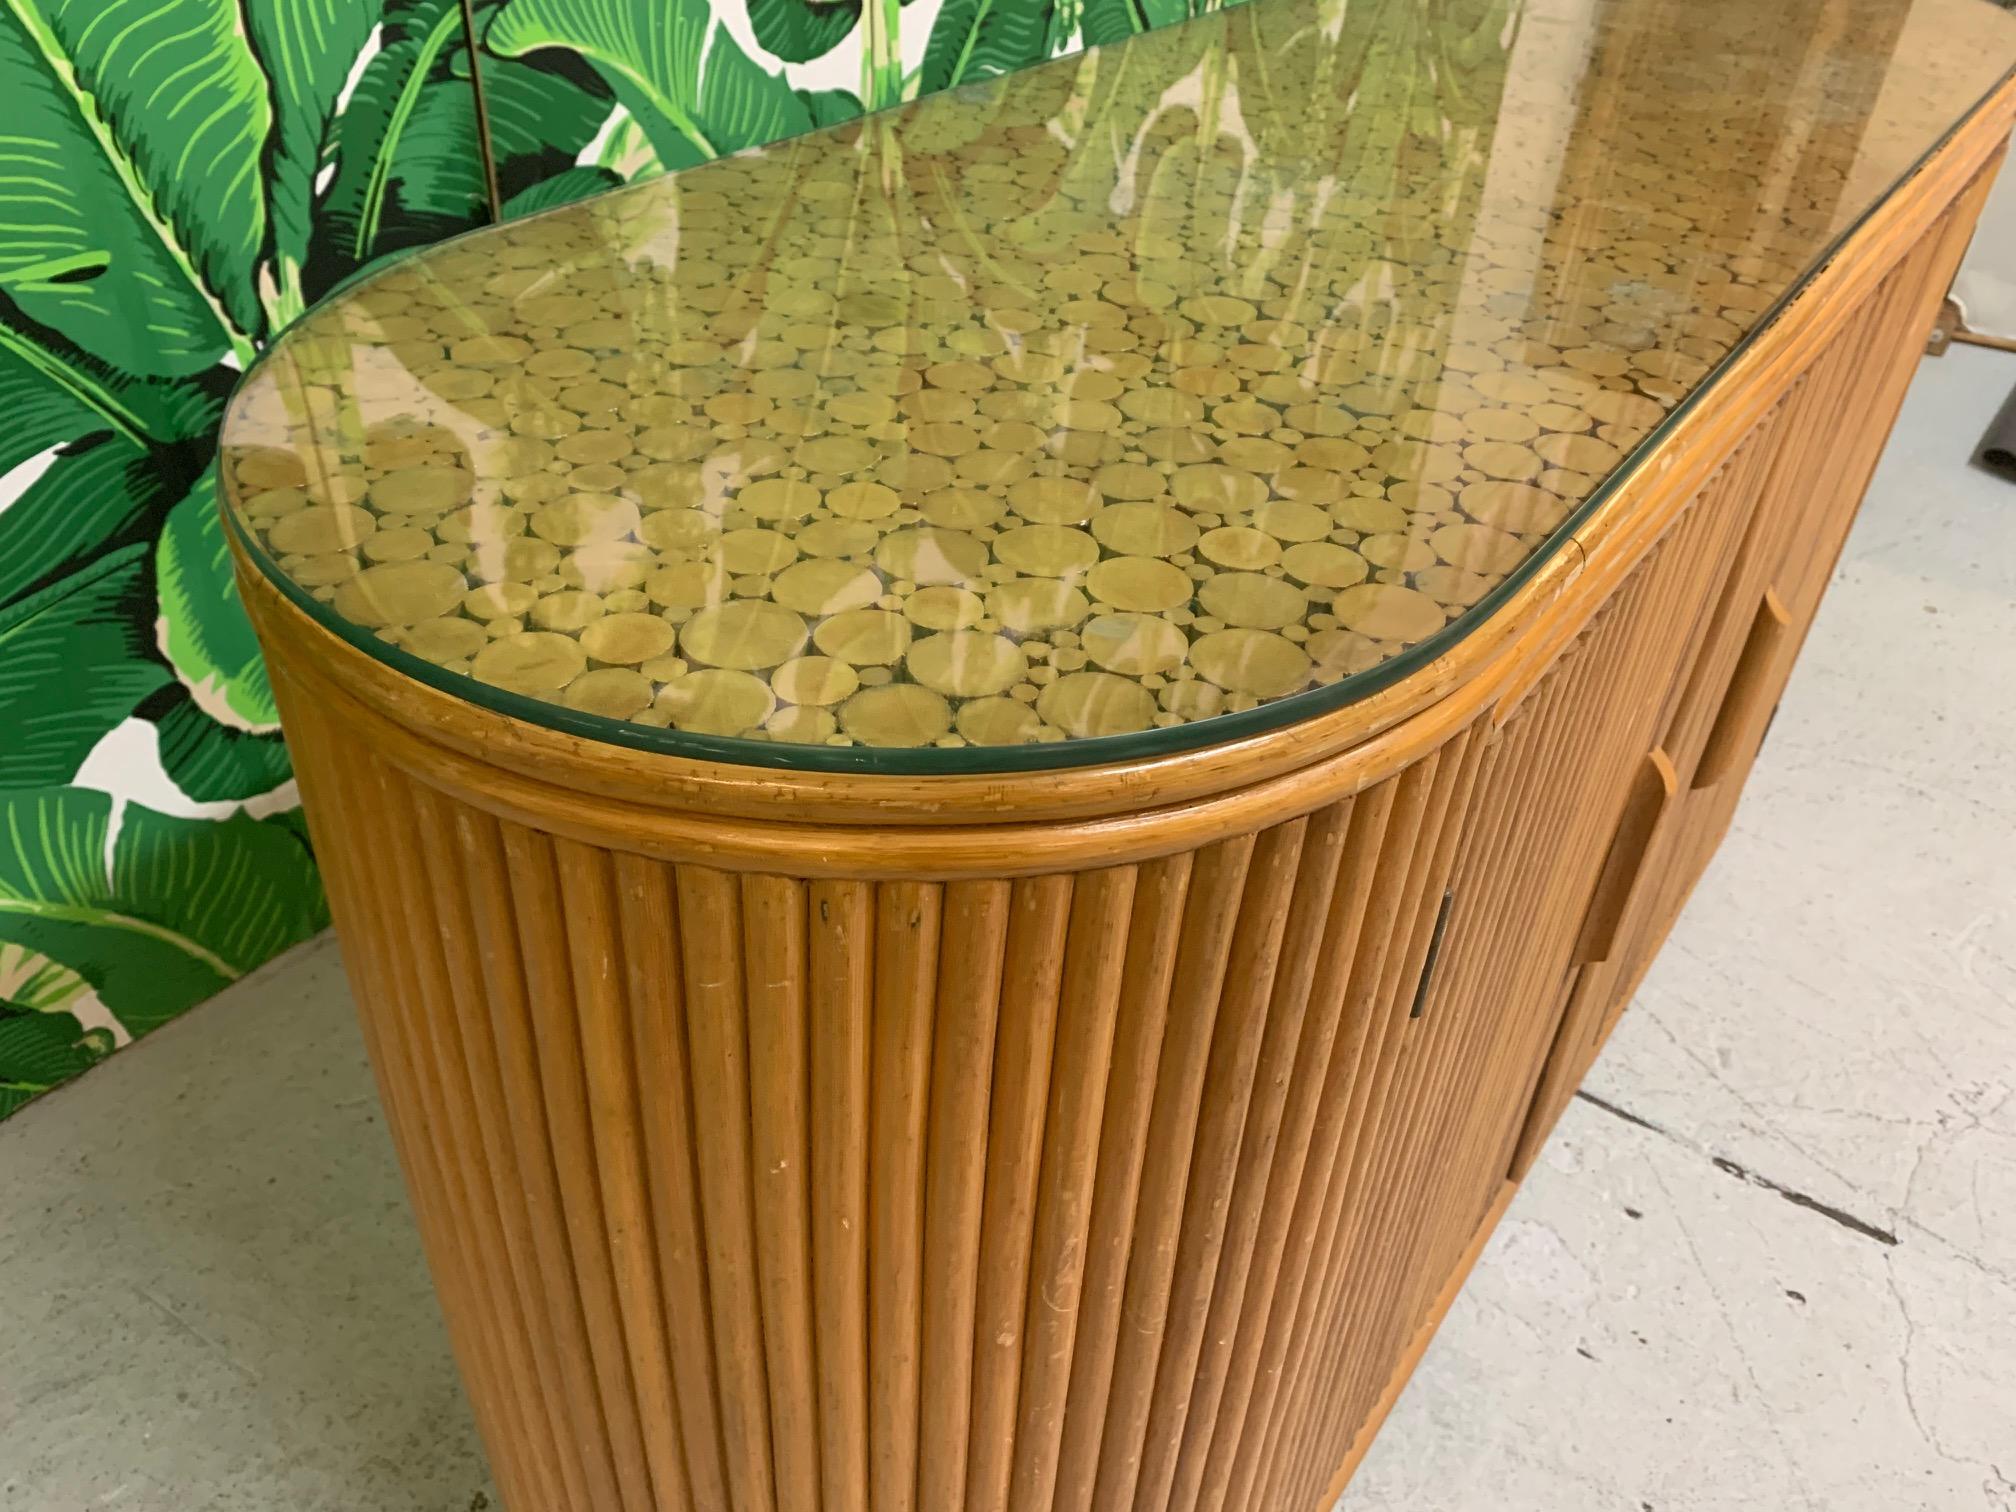 Stunning oval credenza features rattan split reed design with custom cut glass top. Two doors reveal large storage space. Built in the same design aesthetic as the McGuire sheaf of wheat line. Very good condition with only very minor imperfections